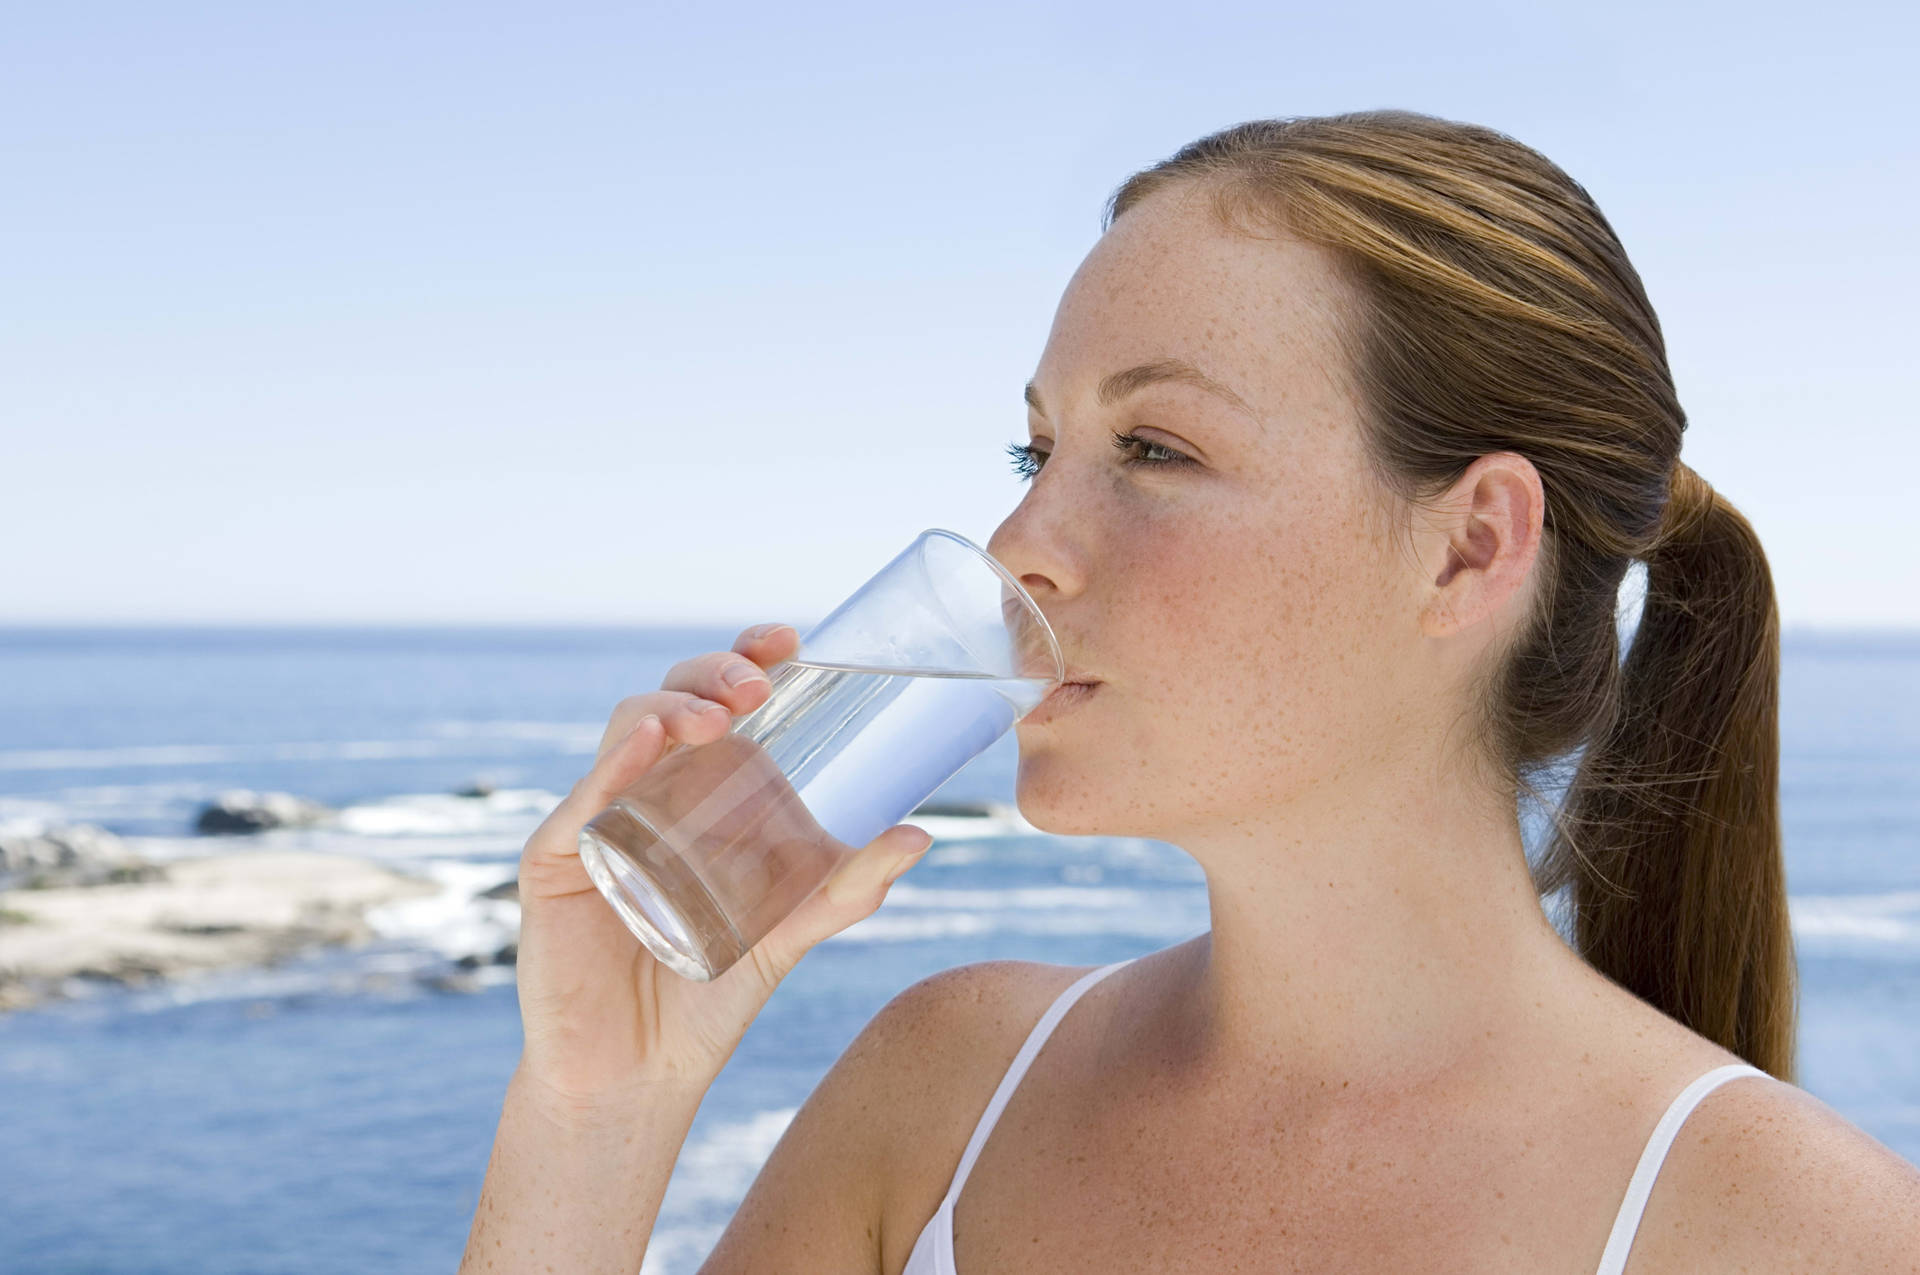 Woman Drinking Water On The Beach Wallpaper